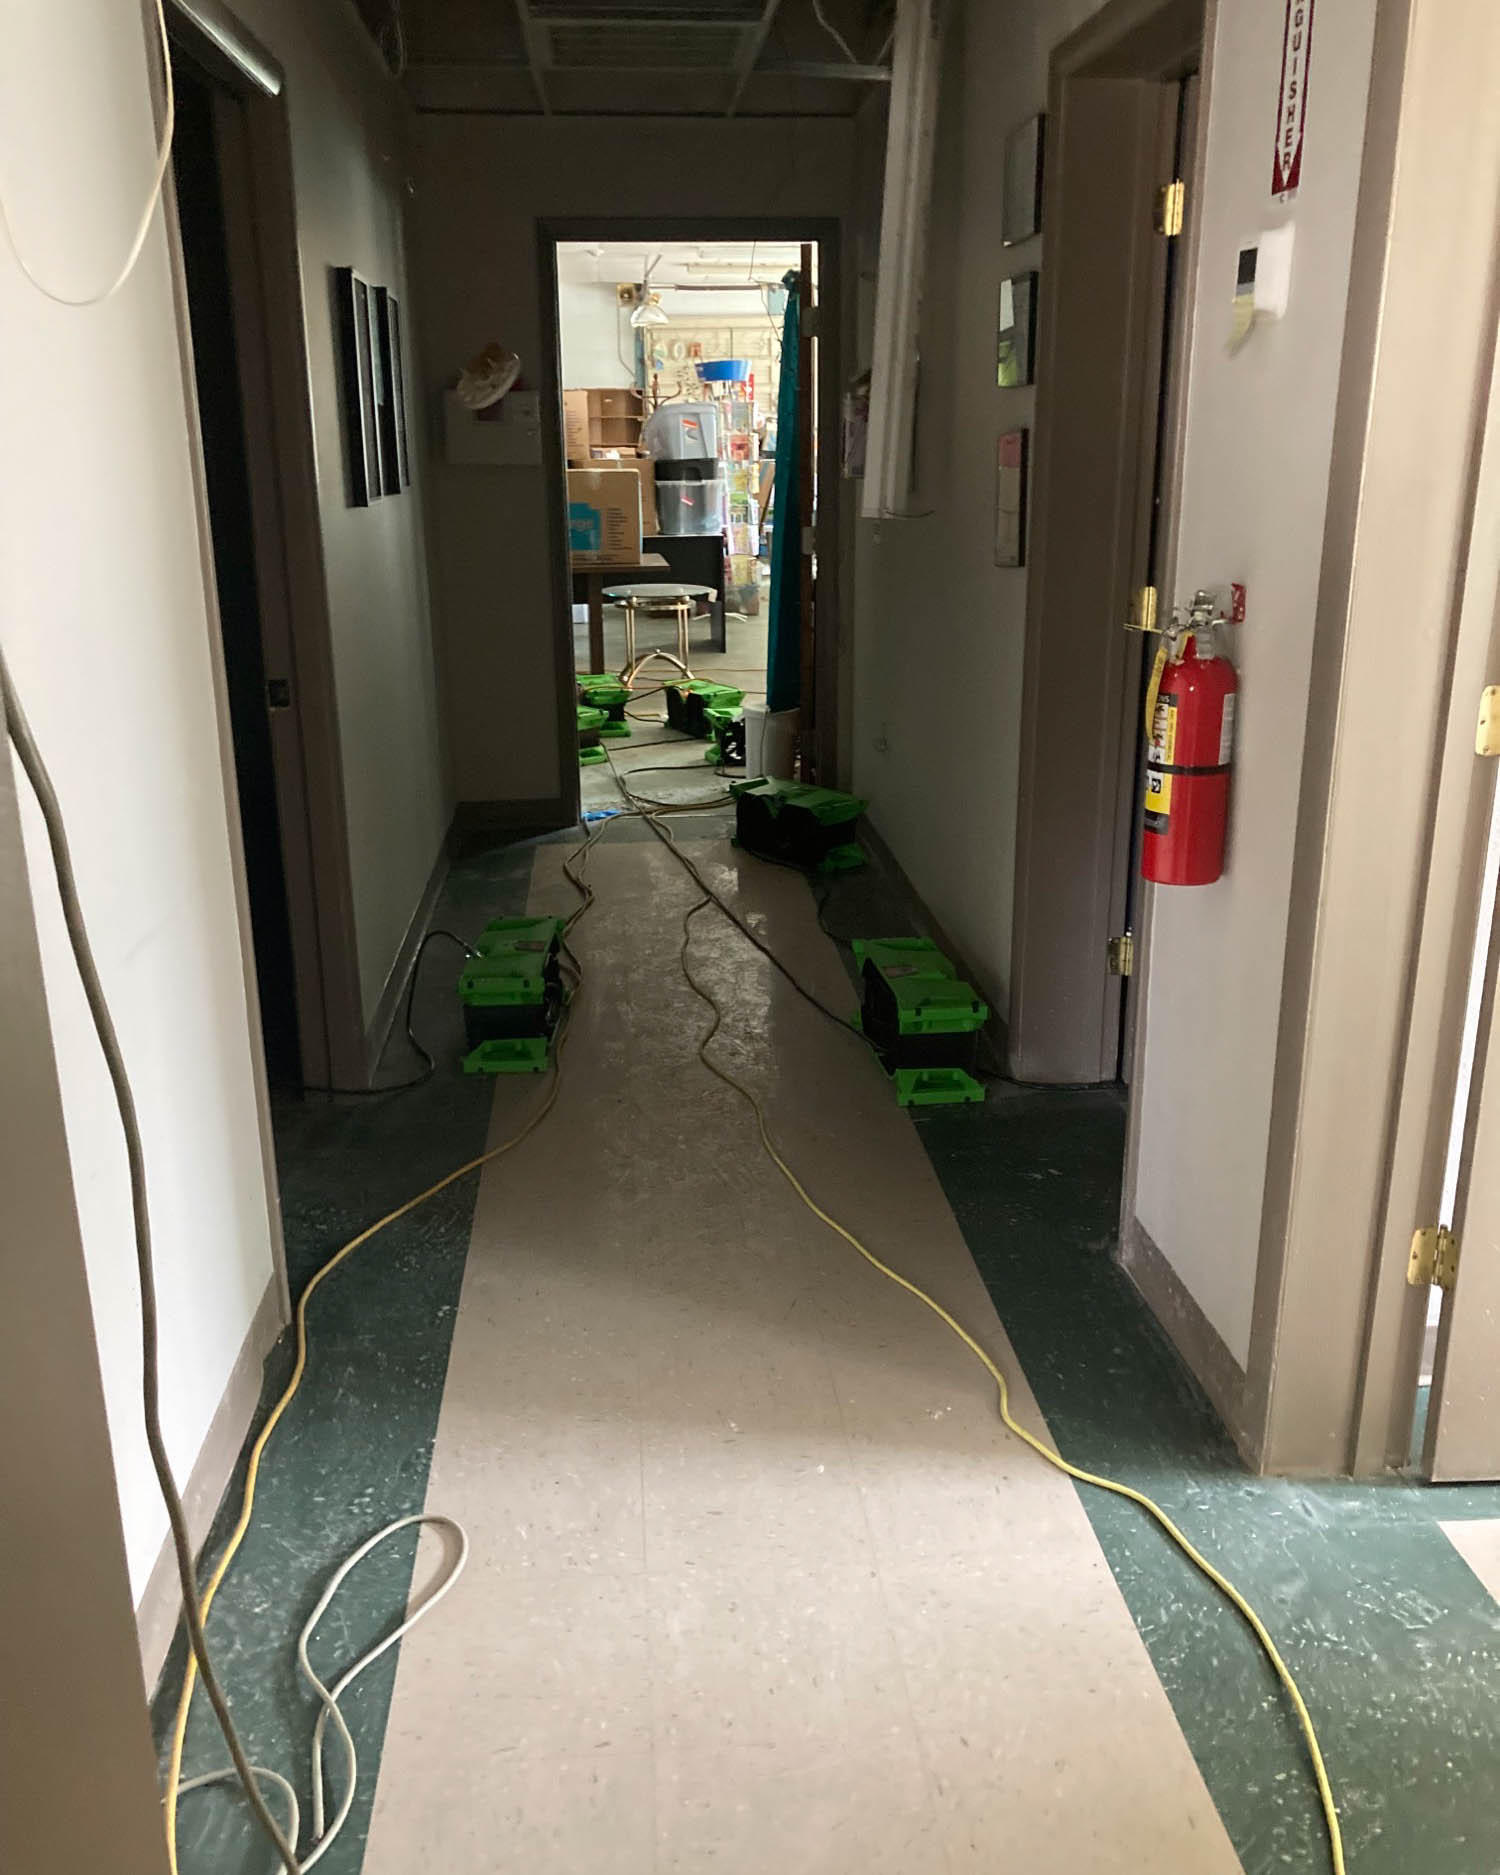 SERVPRO of Cape Coral South is your 24/7 emergency water restoration company in Bokeelia, FL, our teams are ready to help, Call us!